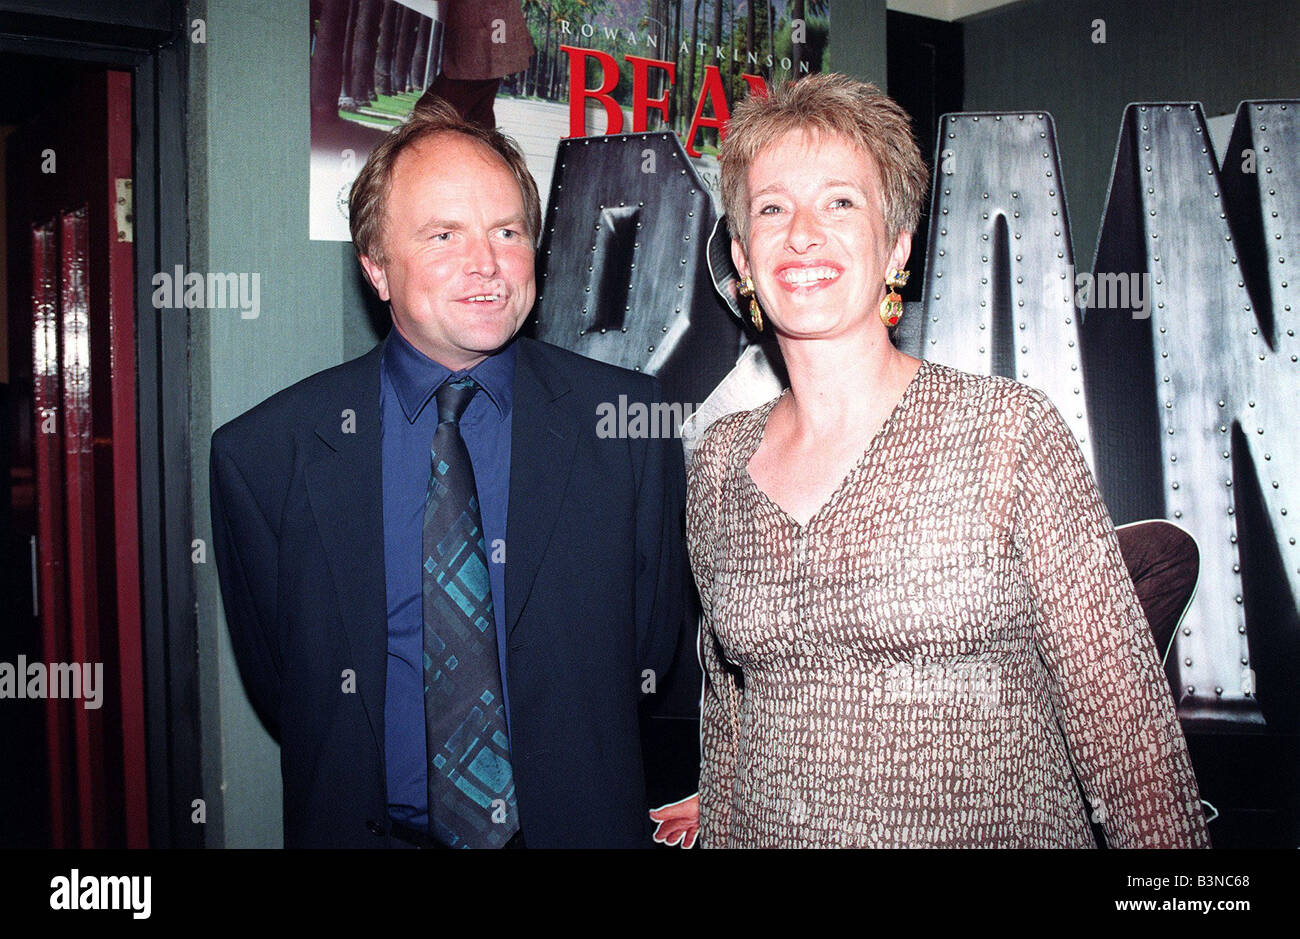 Clive Anderson TV Presenter wife Jane in August 1997 at the film premiere of Mr Bean mirrorpix weby Stock Photo